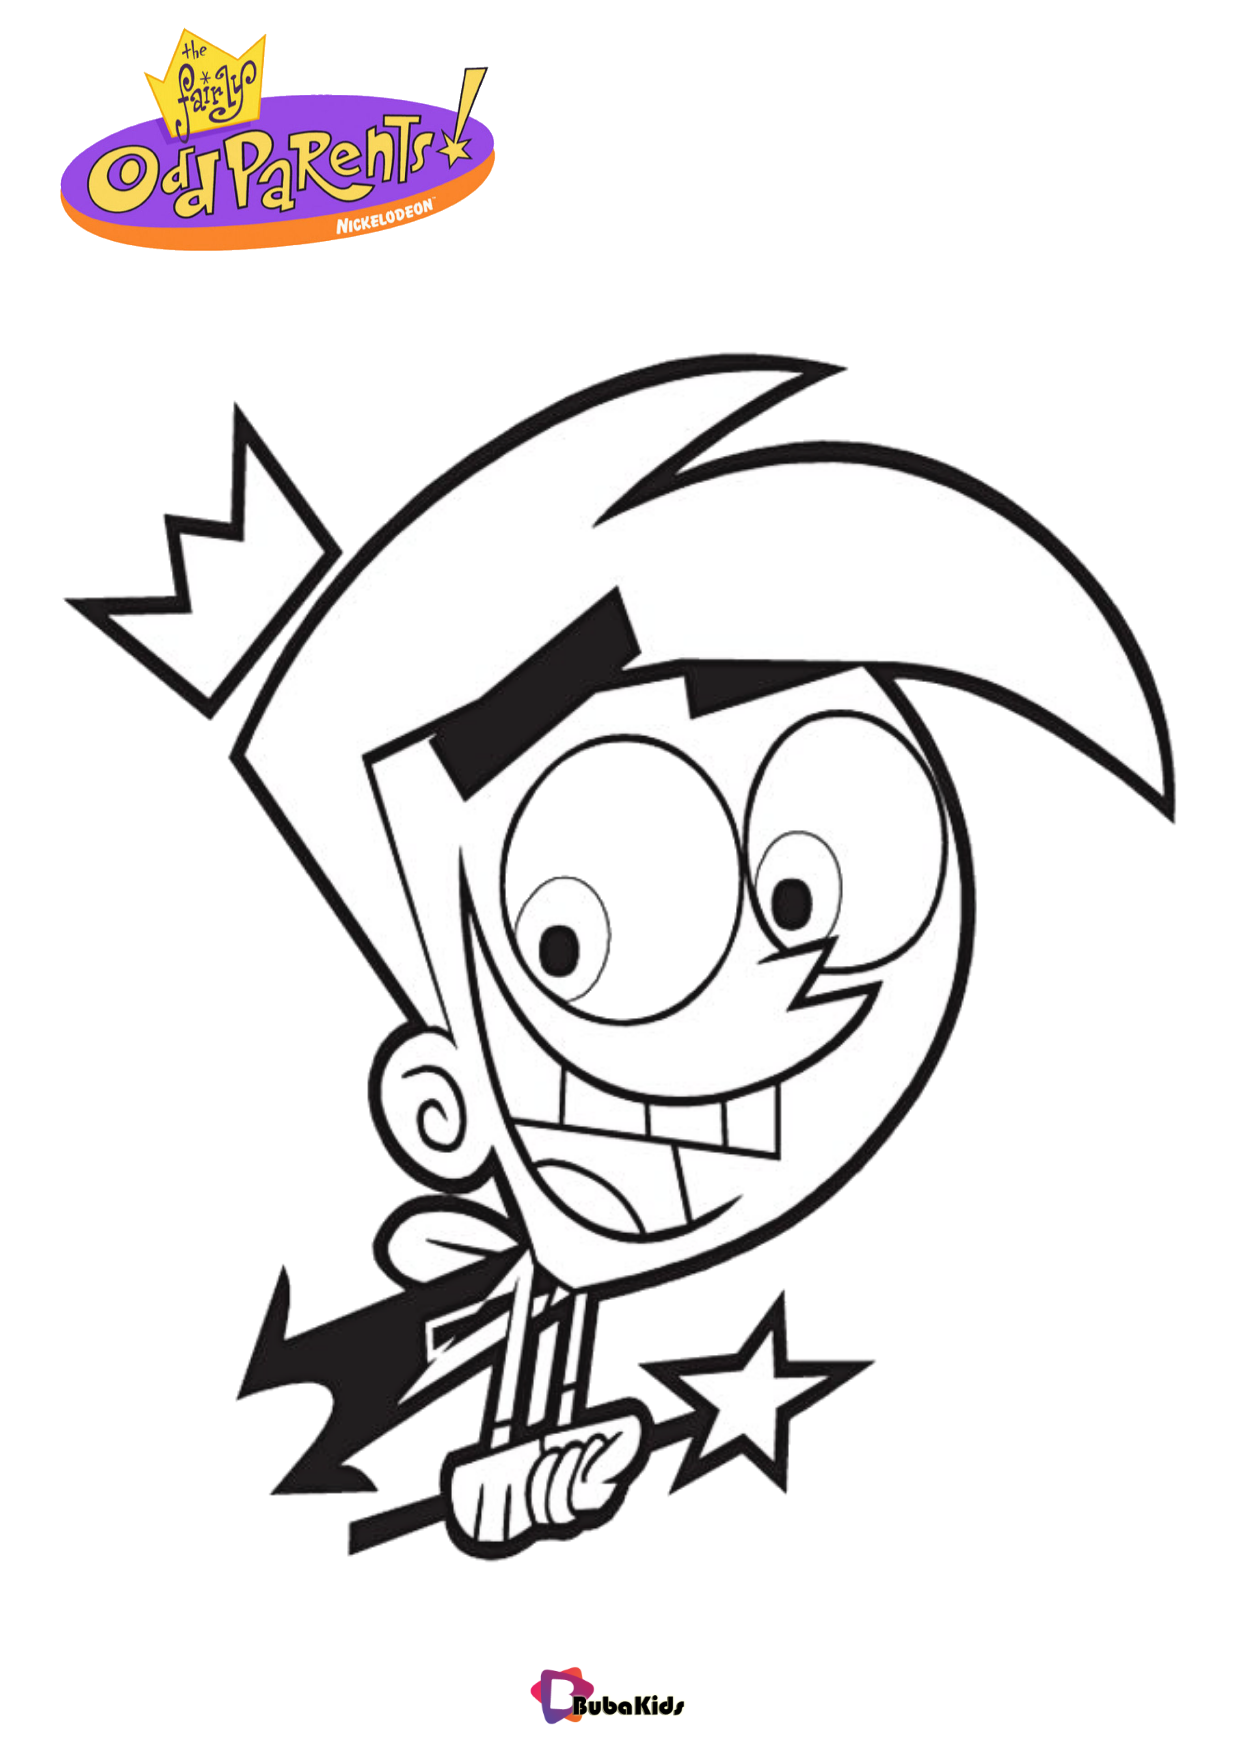 Timmy Turner Fairly OddParents Nickelodeon tv series coloring page Wallpaper